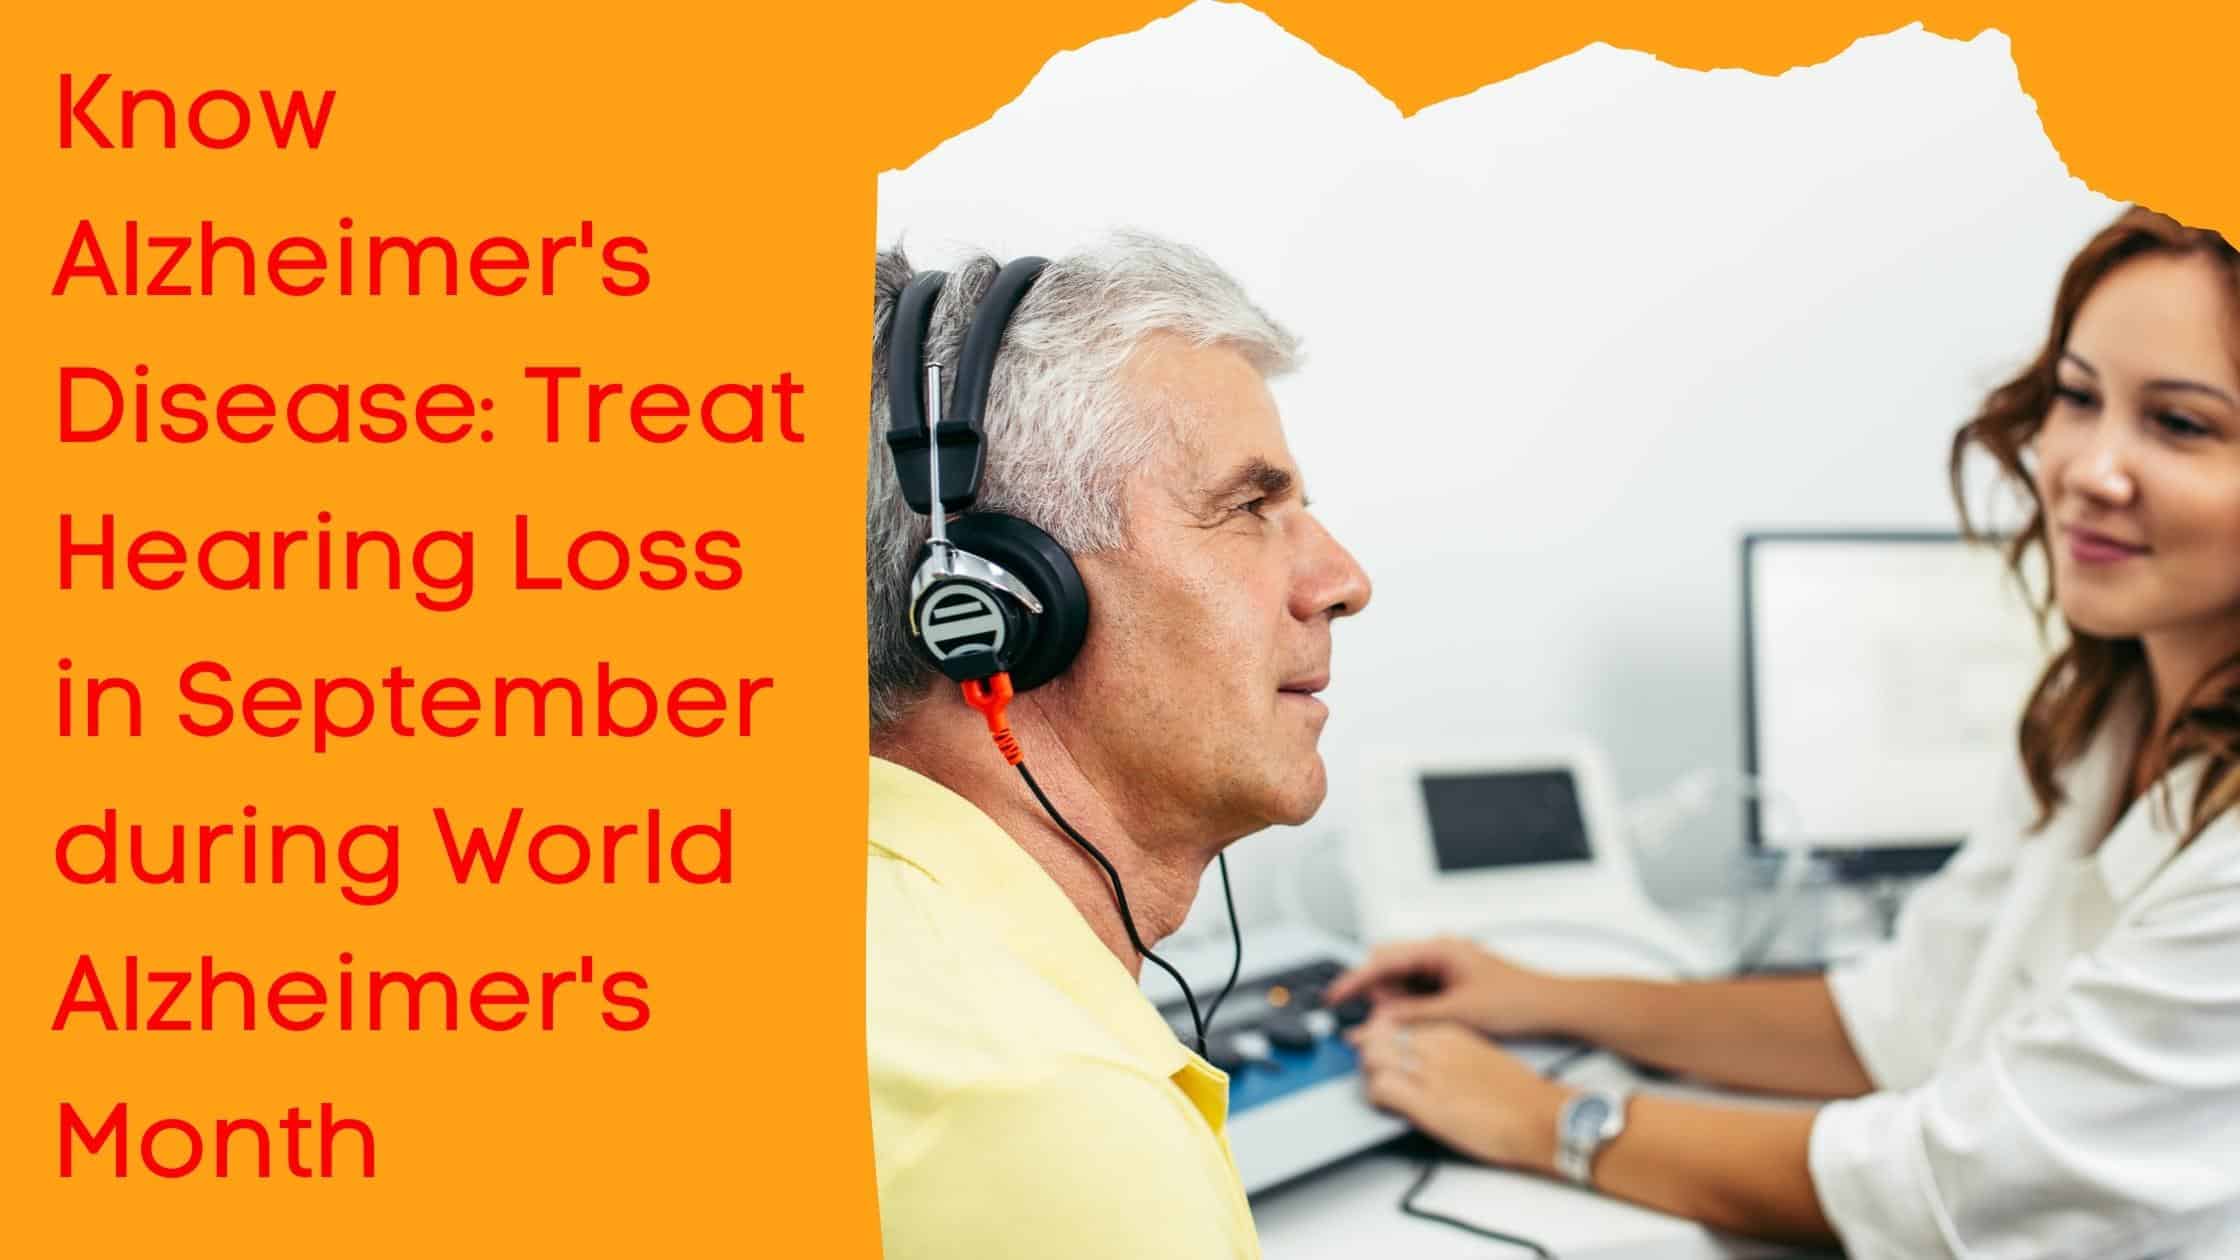 know alzheimers disease treat hearing loss in september during world alzheimers month